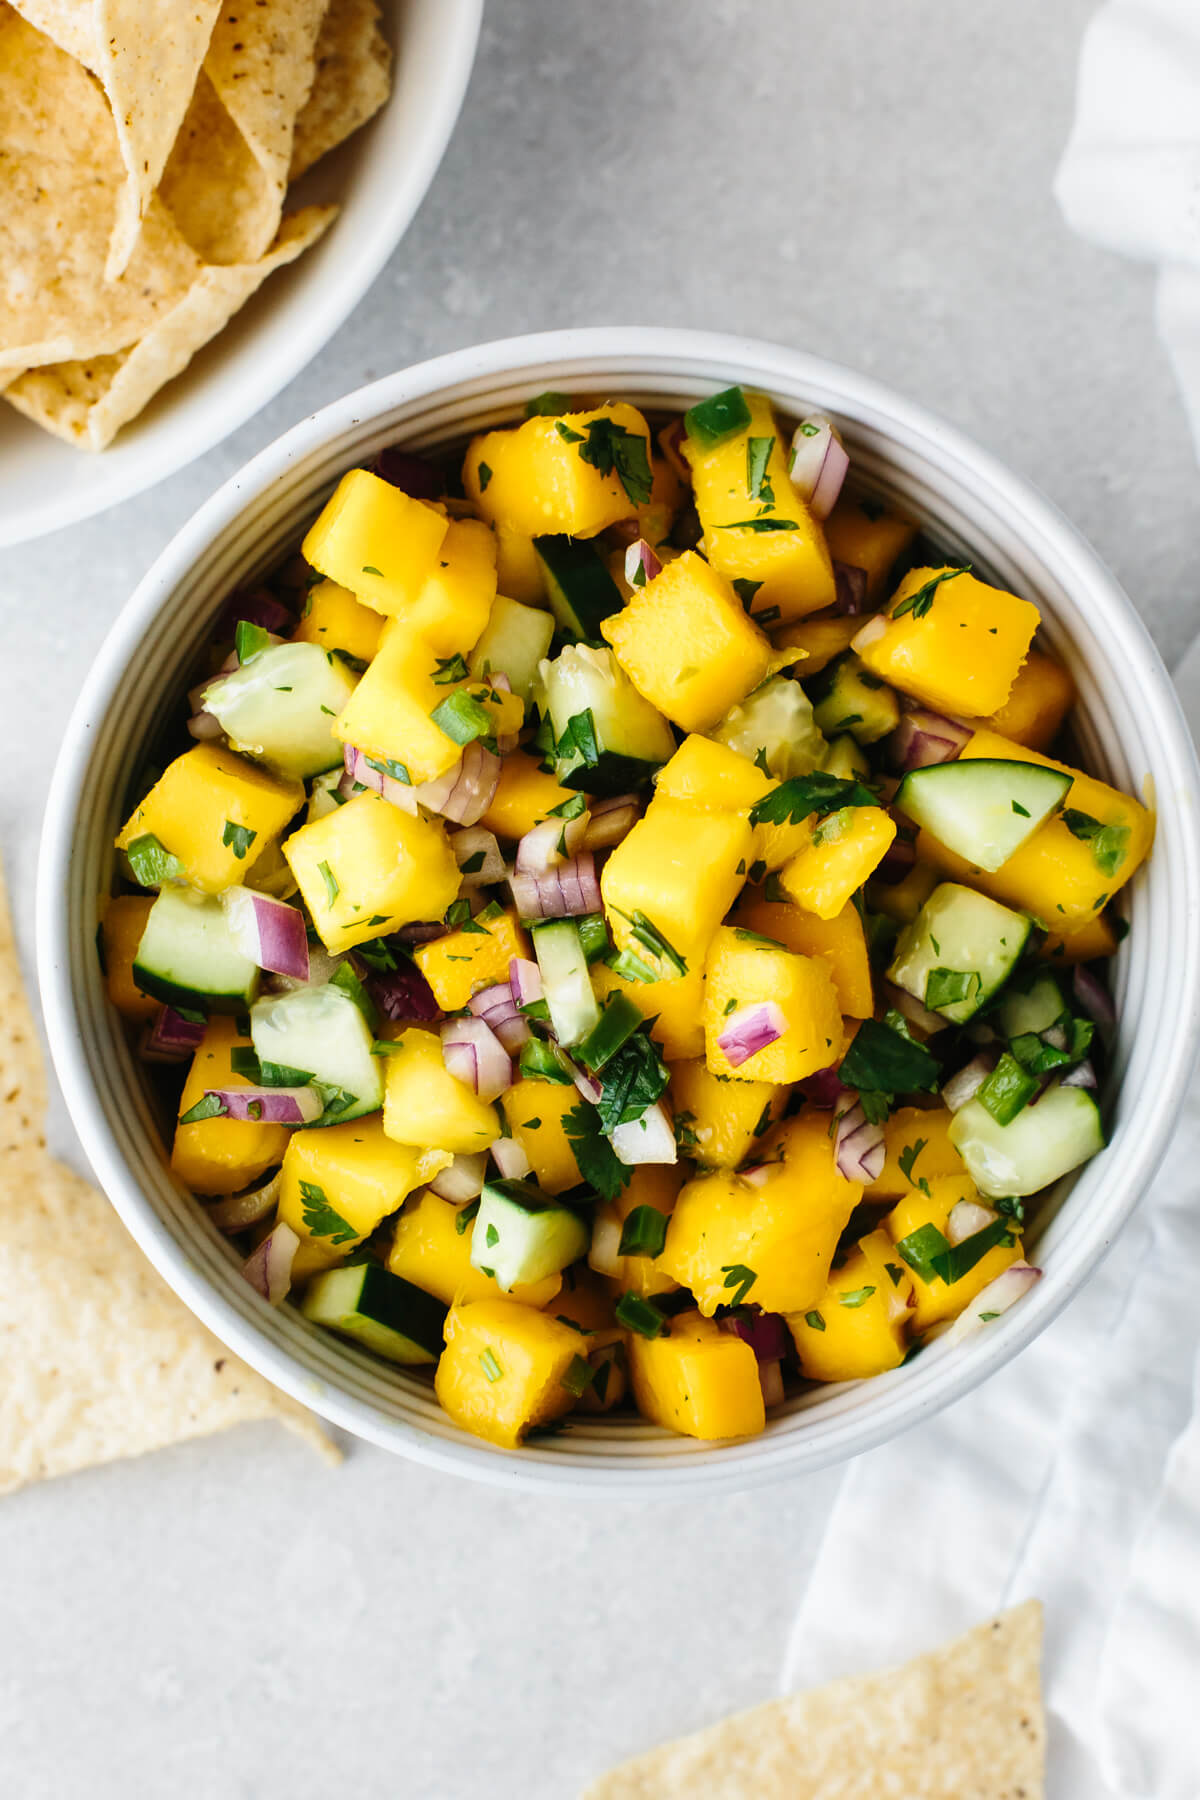 Mango salsa in a bowl next to chips.